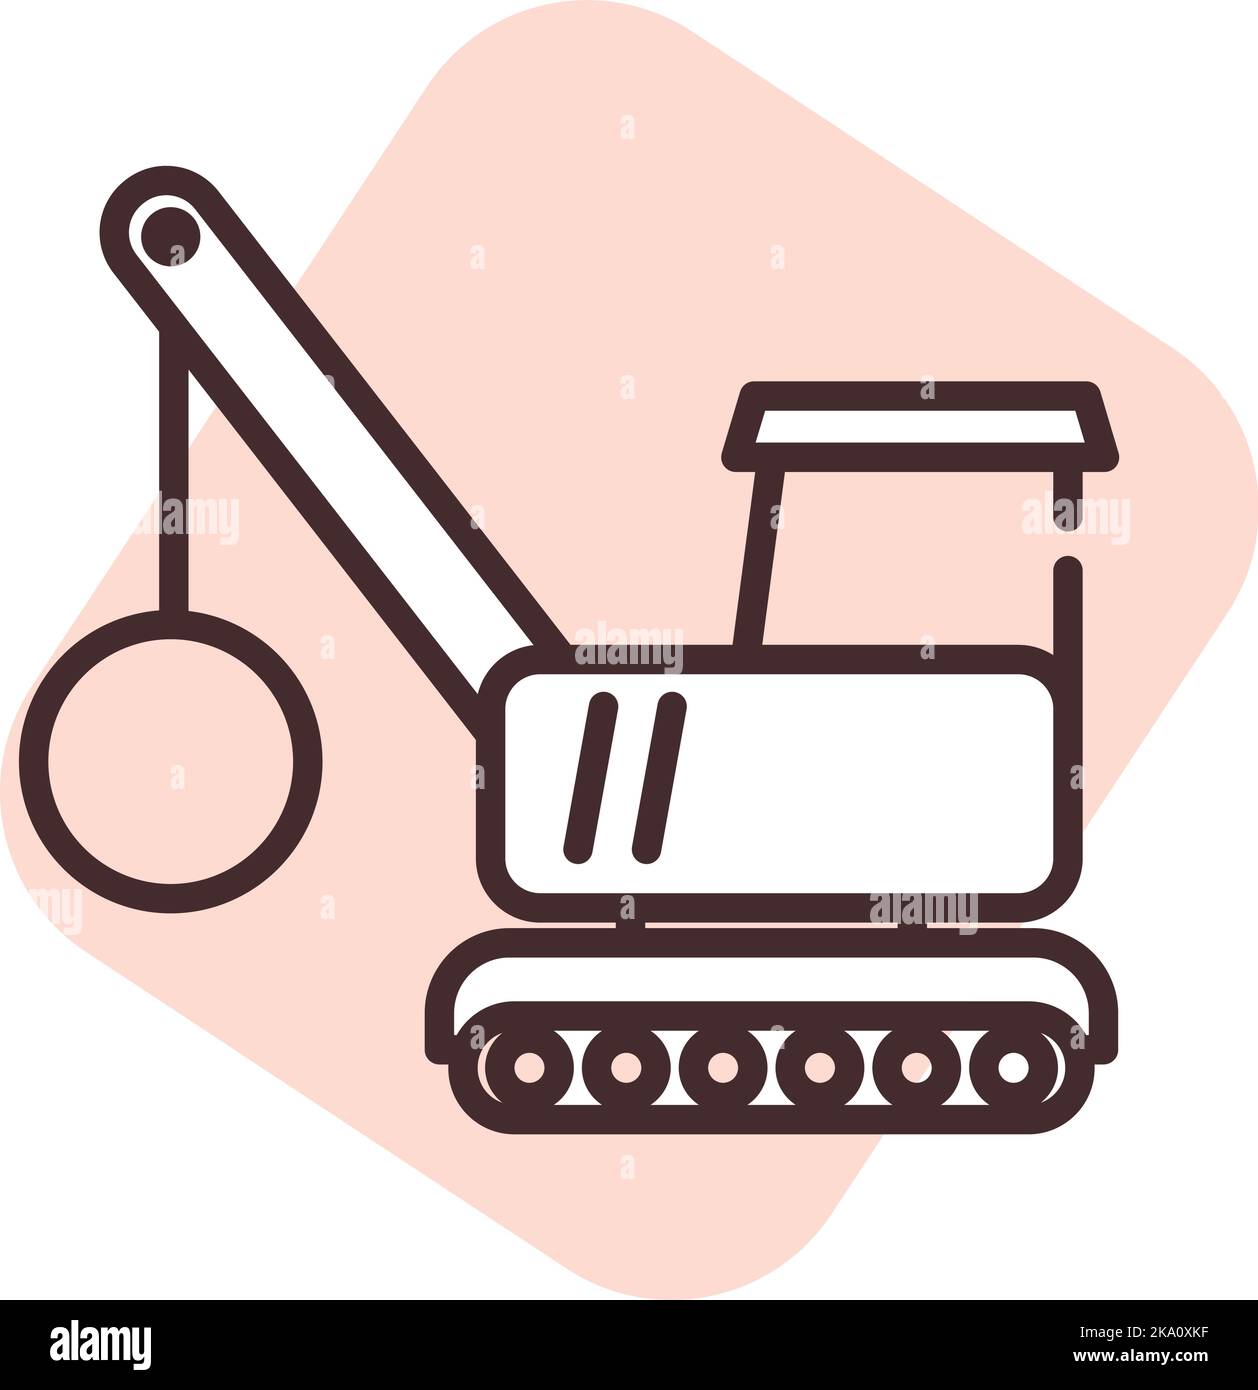 Construction wrecking ball; illustration or icon; vector on white background. Stock Vector